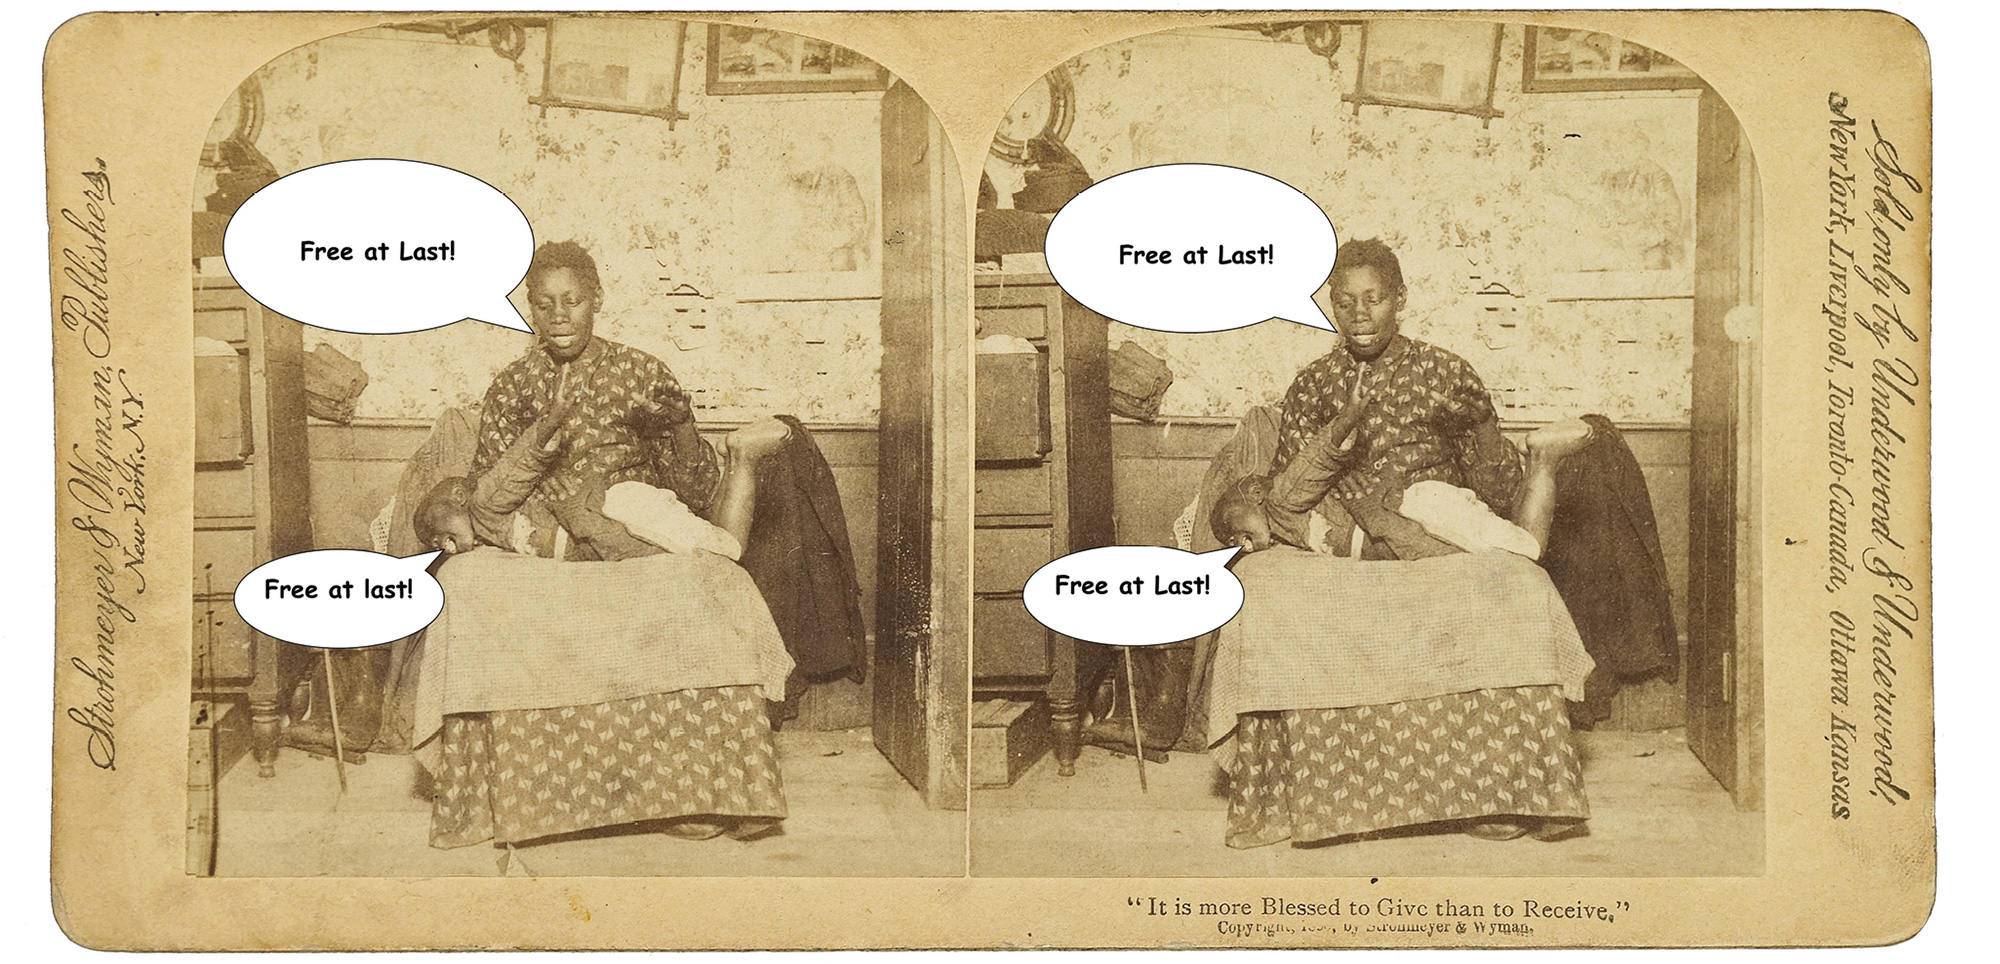 A two thousand and five stereograph made by Javier Téllez in collaboration with patients from the Bronx Psychiatric center.